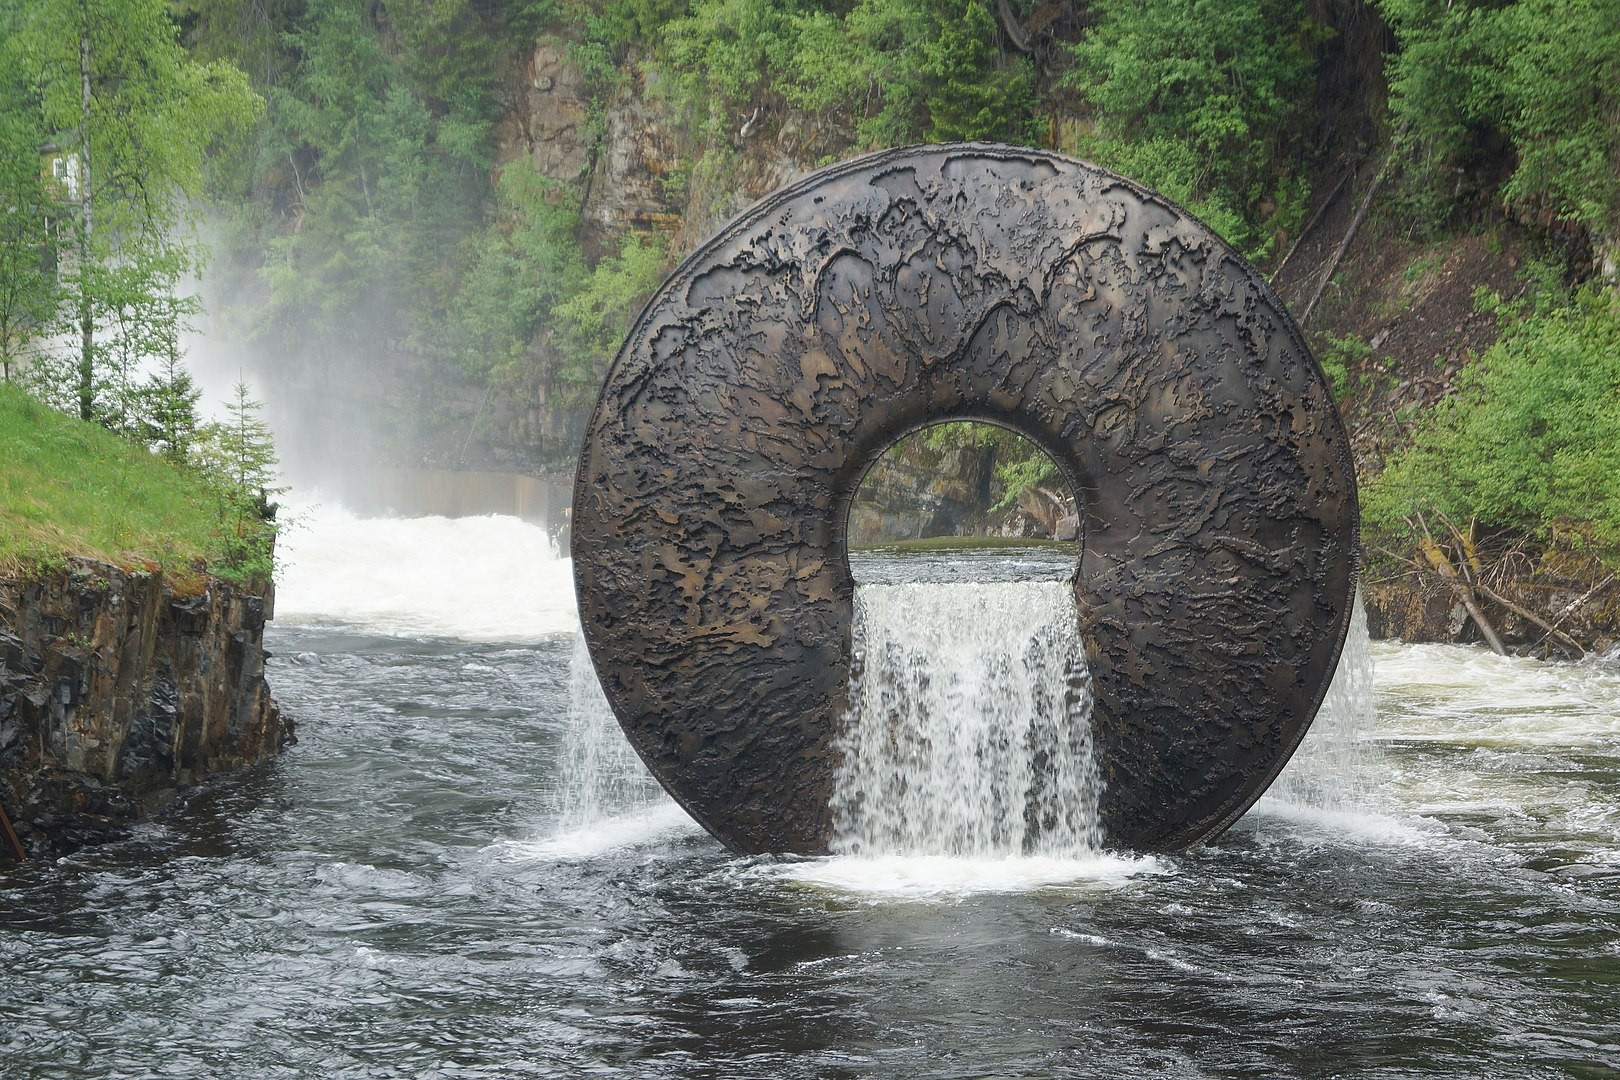 Von Randi Hausken from Bærum, Norway - “ All of Nature Flows Through Us” by Marc Quinn, CC BY-SA 2.0, https://commons.wikimedia.org/w/index.php?curid=92858677